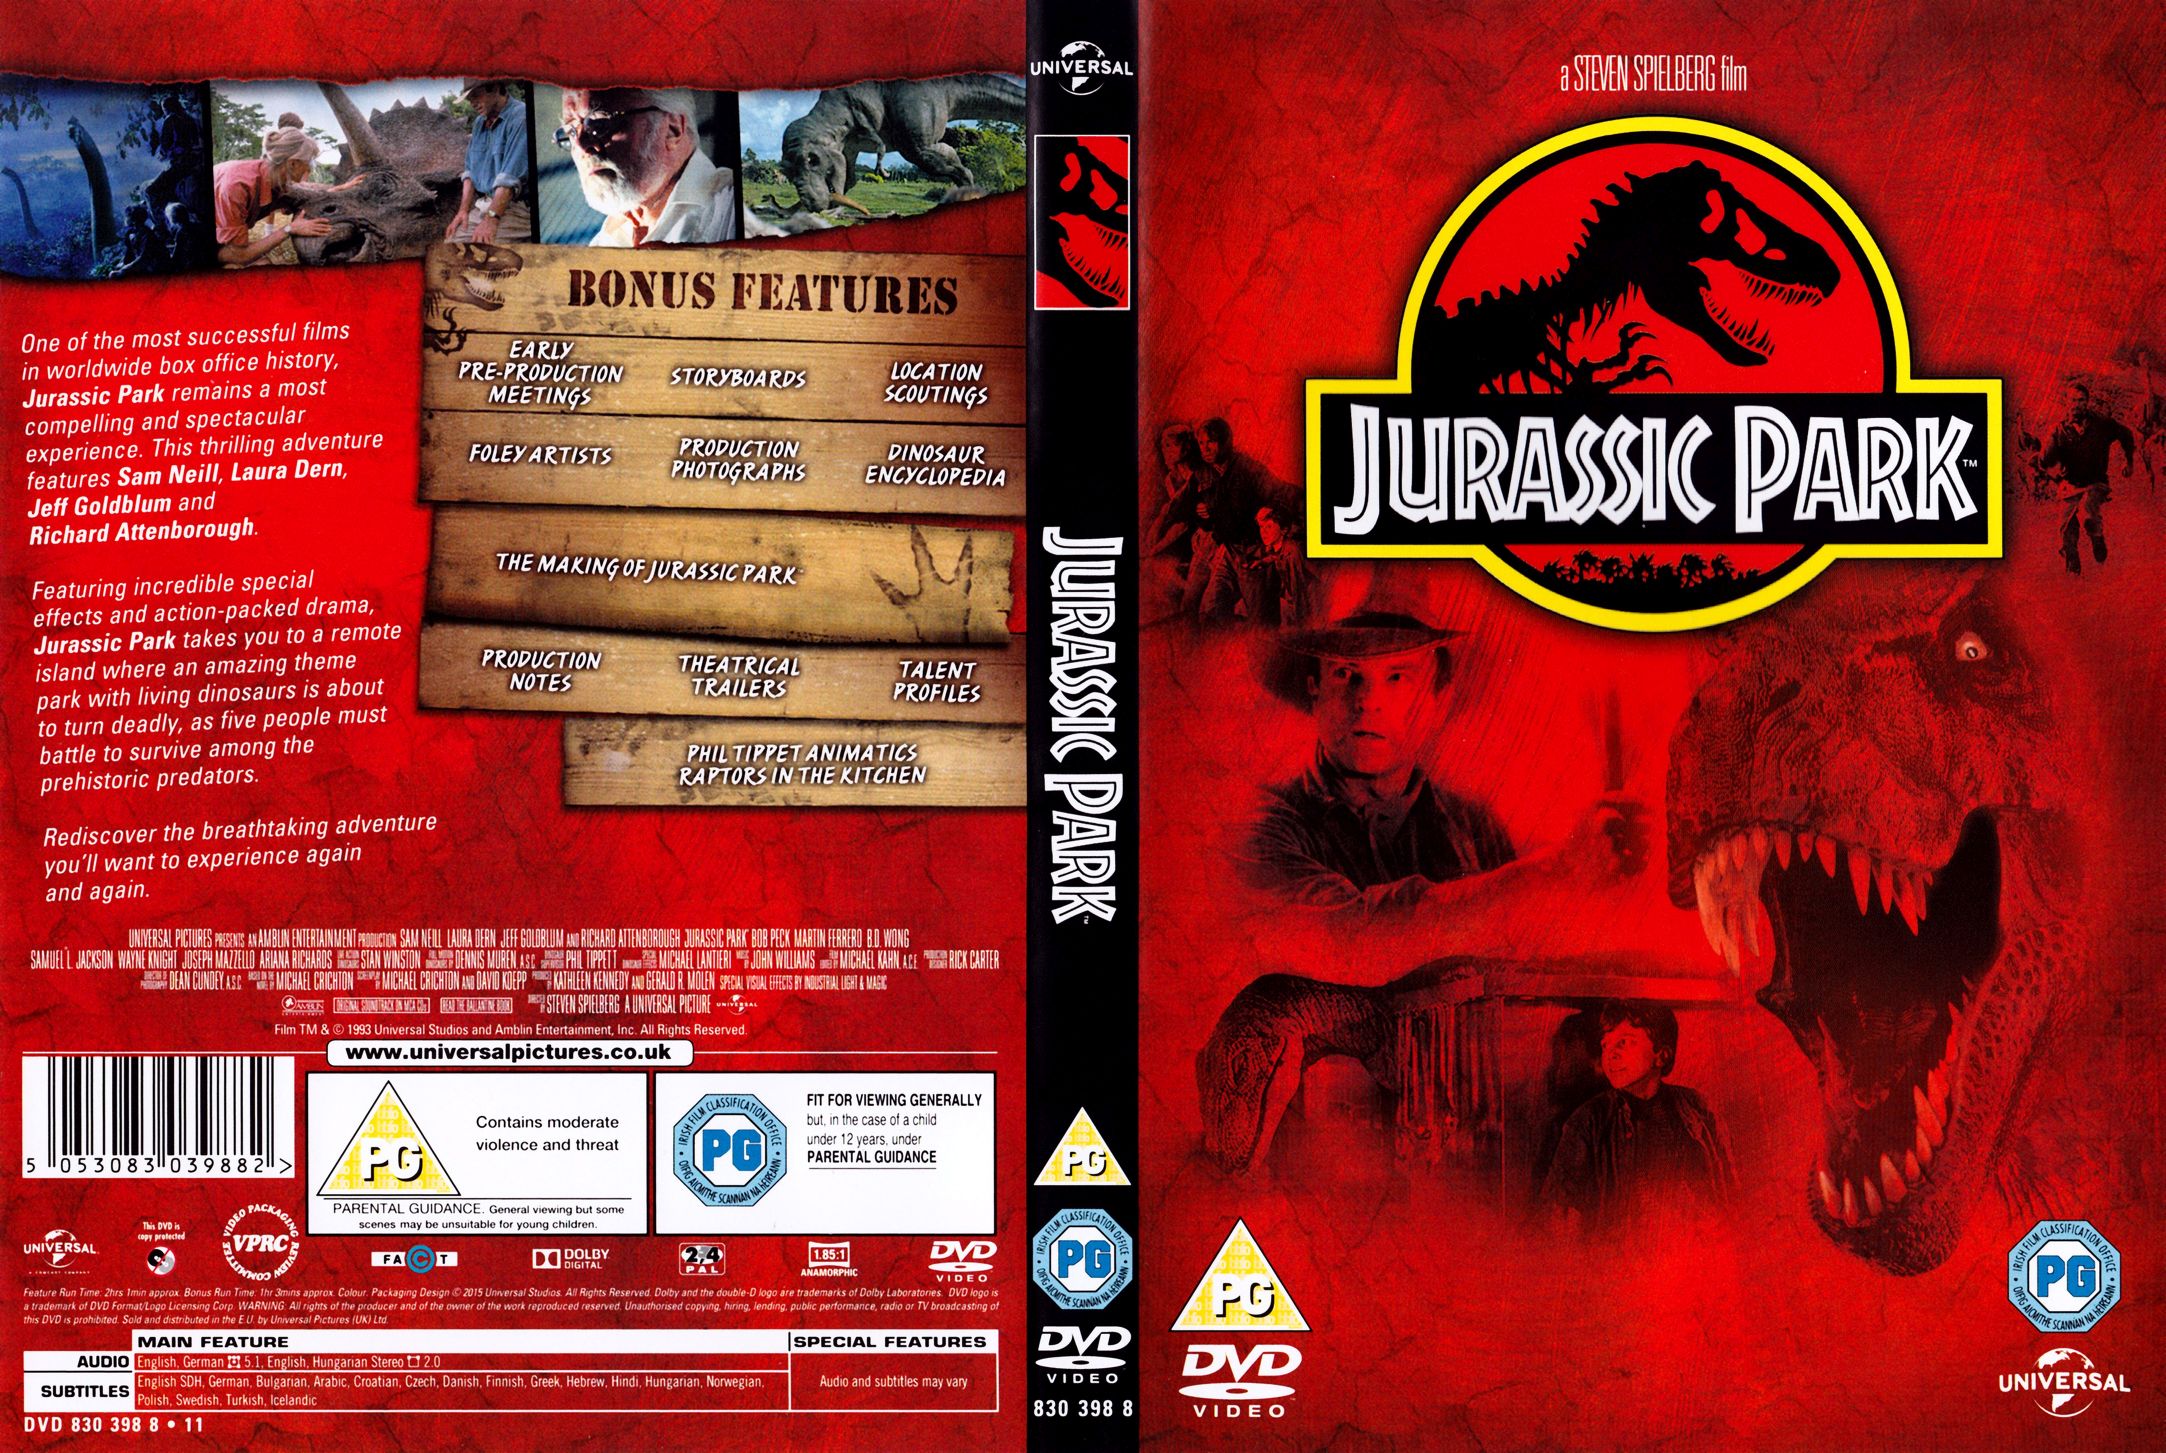 Jurassic Park 1993 R2 Cover Dvd Covers Cover Century Over 500 000 Album Art Covers For Free